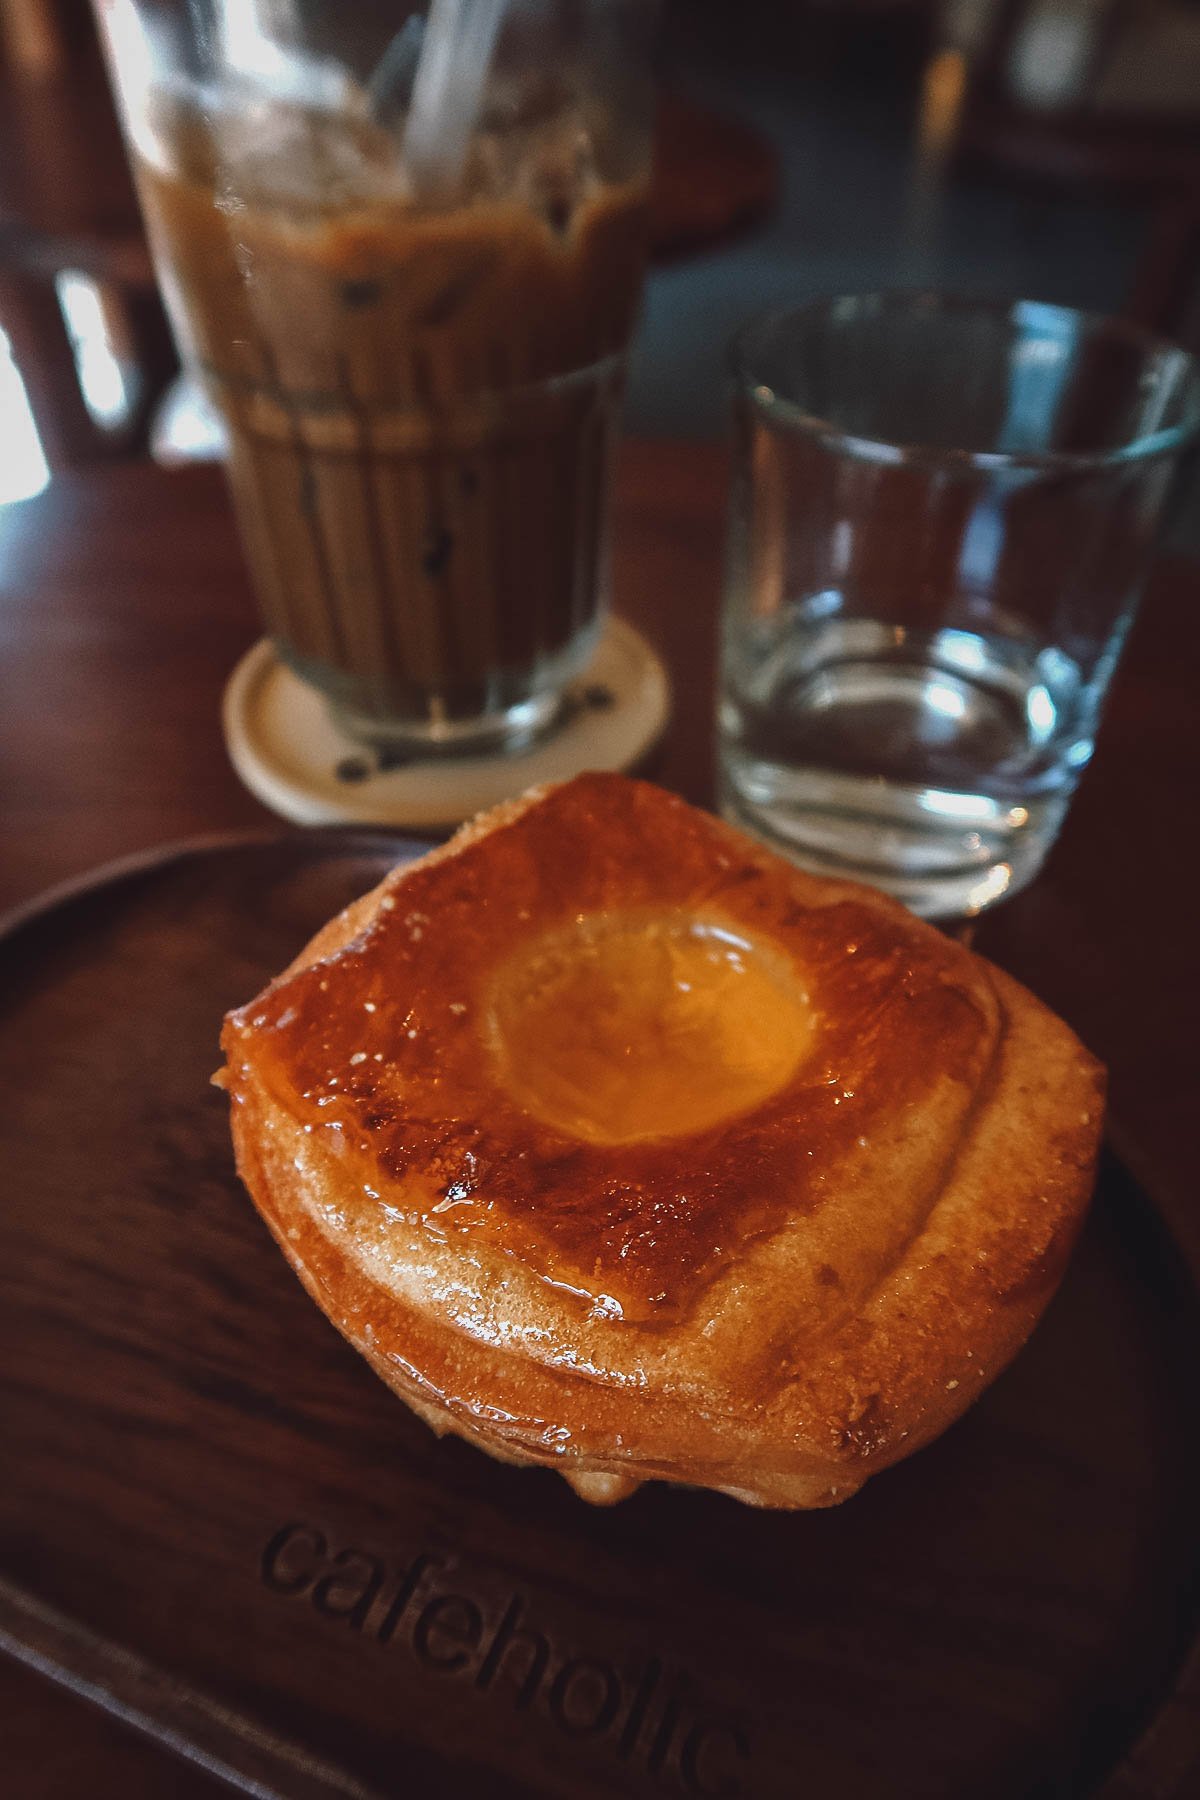 Pastry at a cafe in Danang, Vietnam